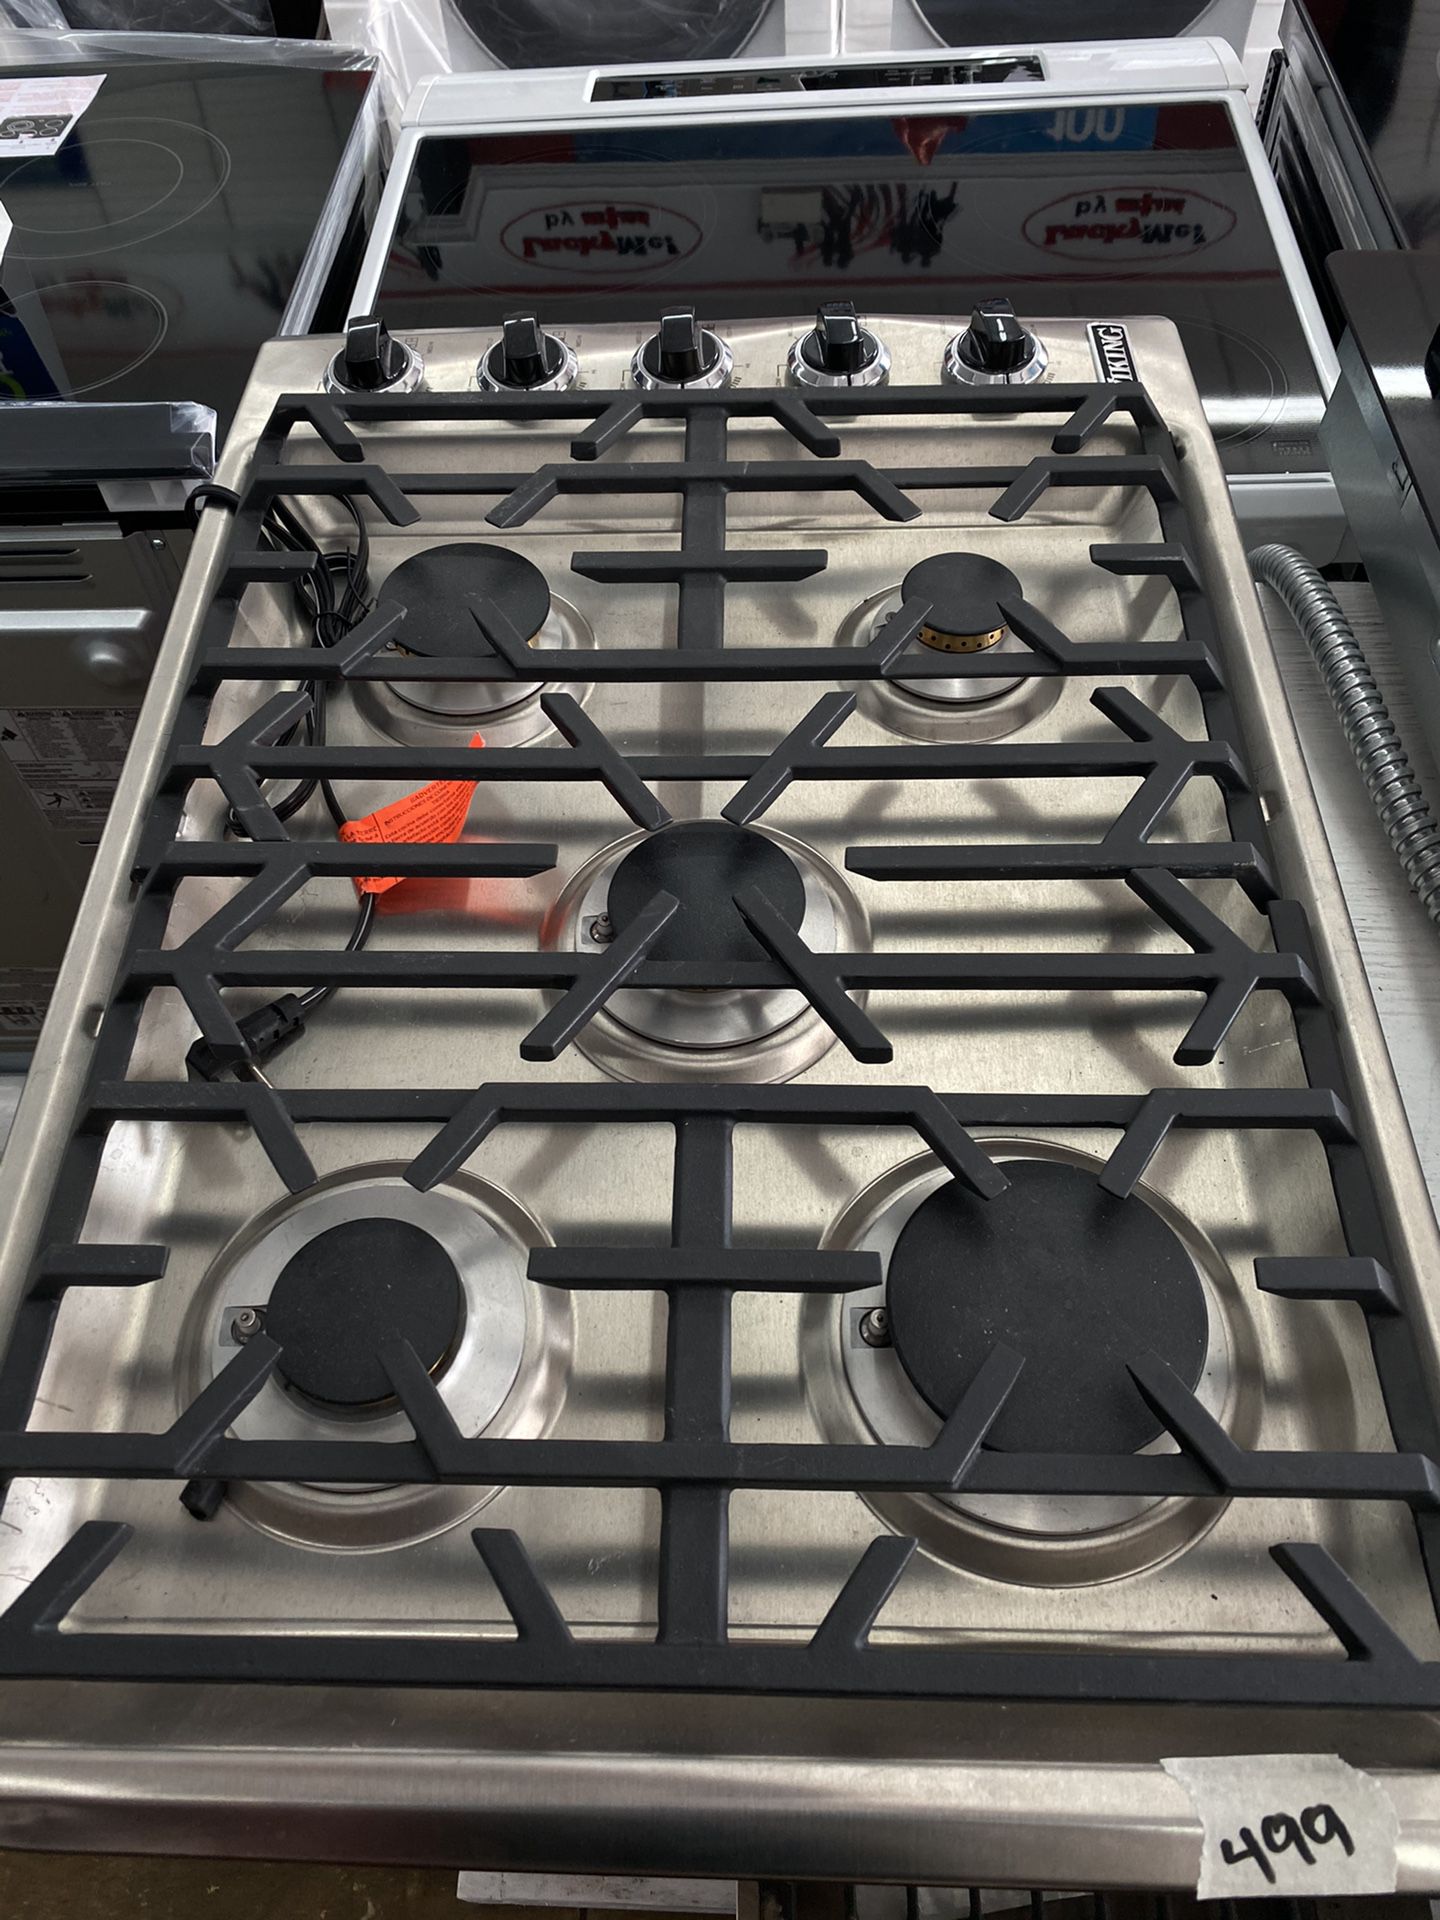 Cooktop, Viking, kek appliances, kissimmee, $39 down payment, ask for enas